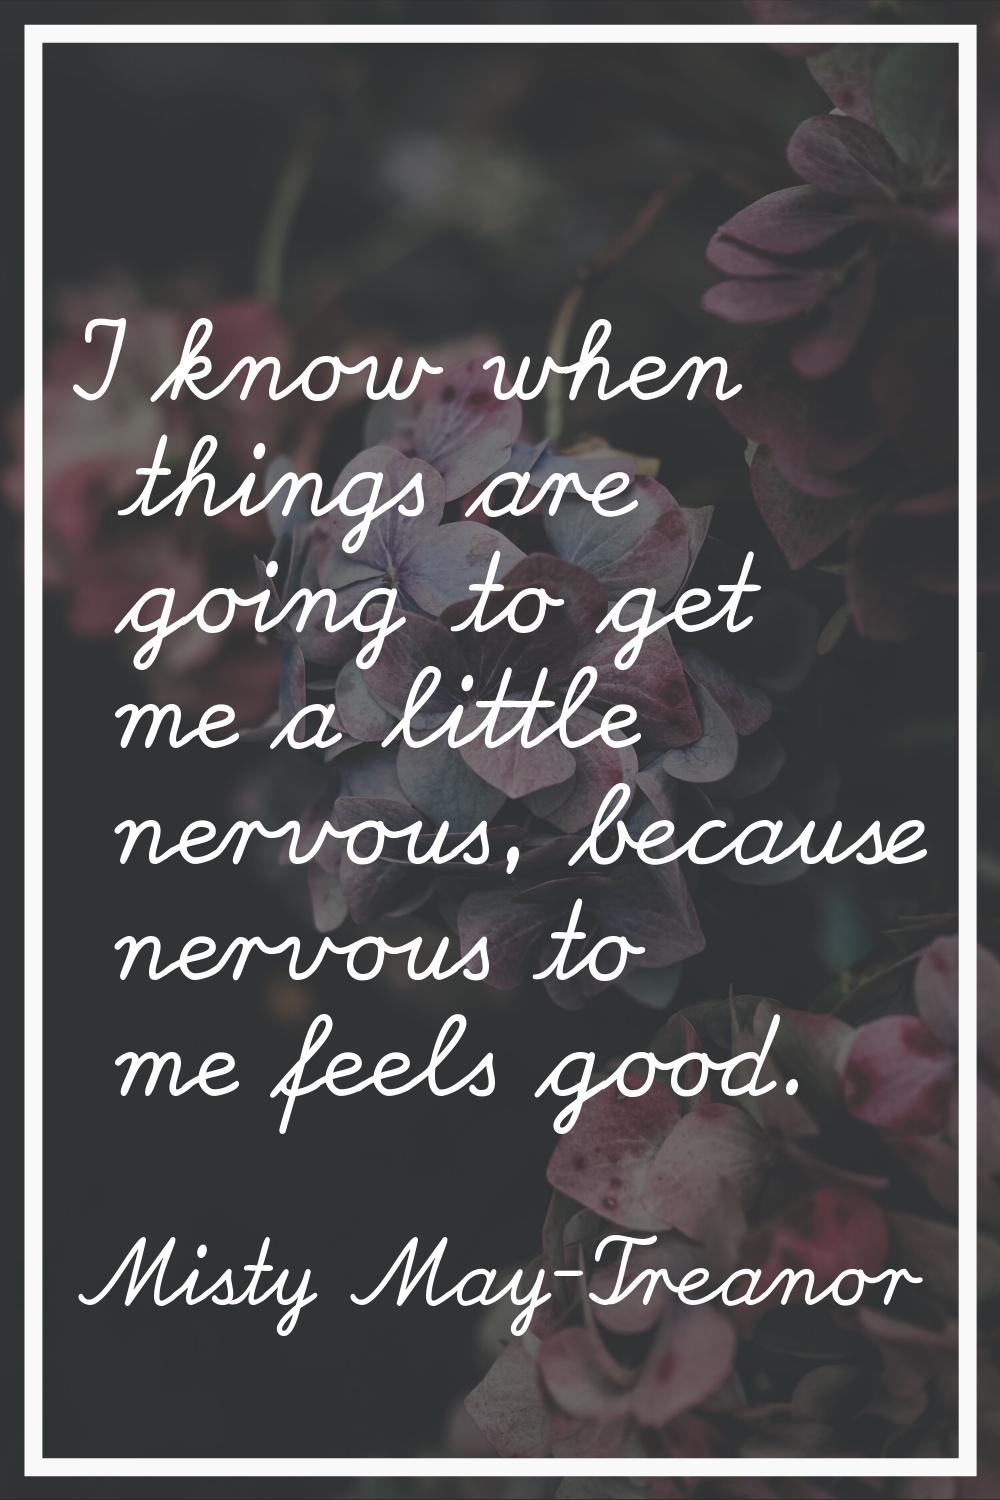 I know when things are going to get me a little nervous, because nervous to me feels good.